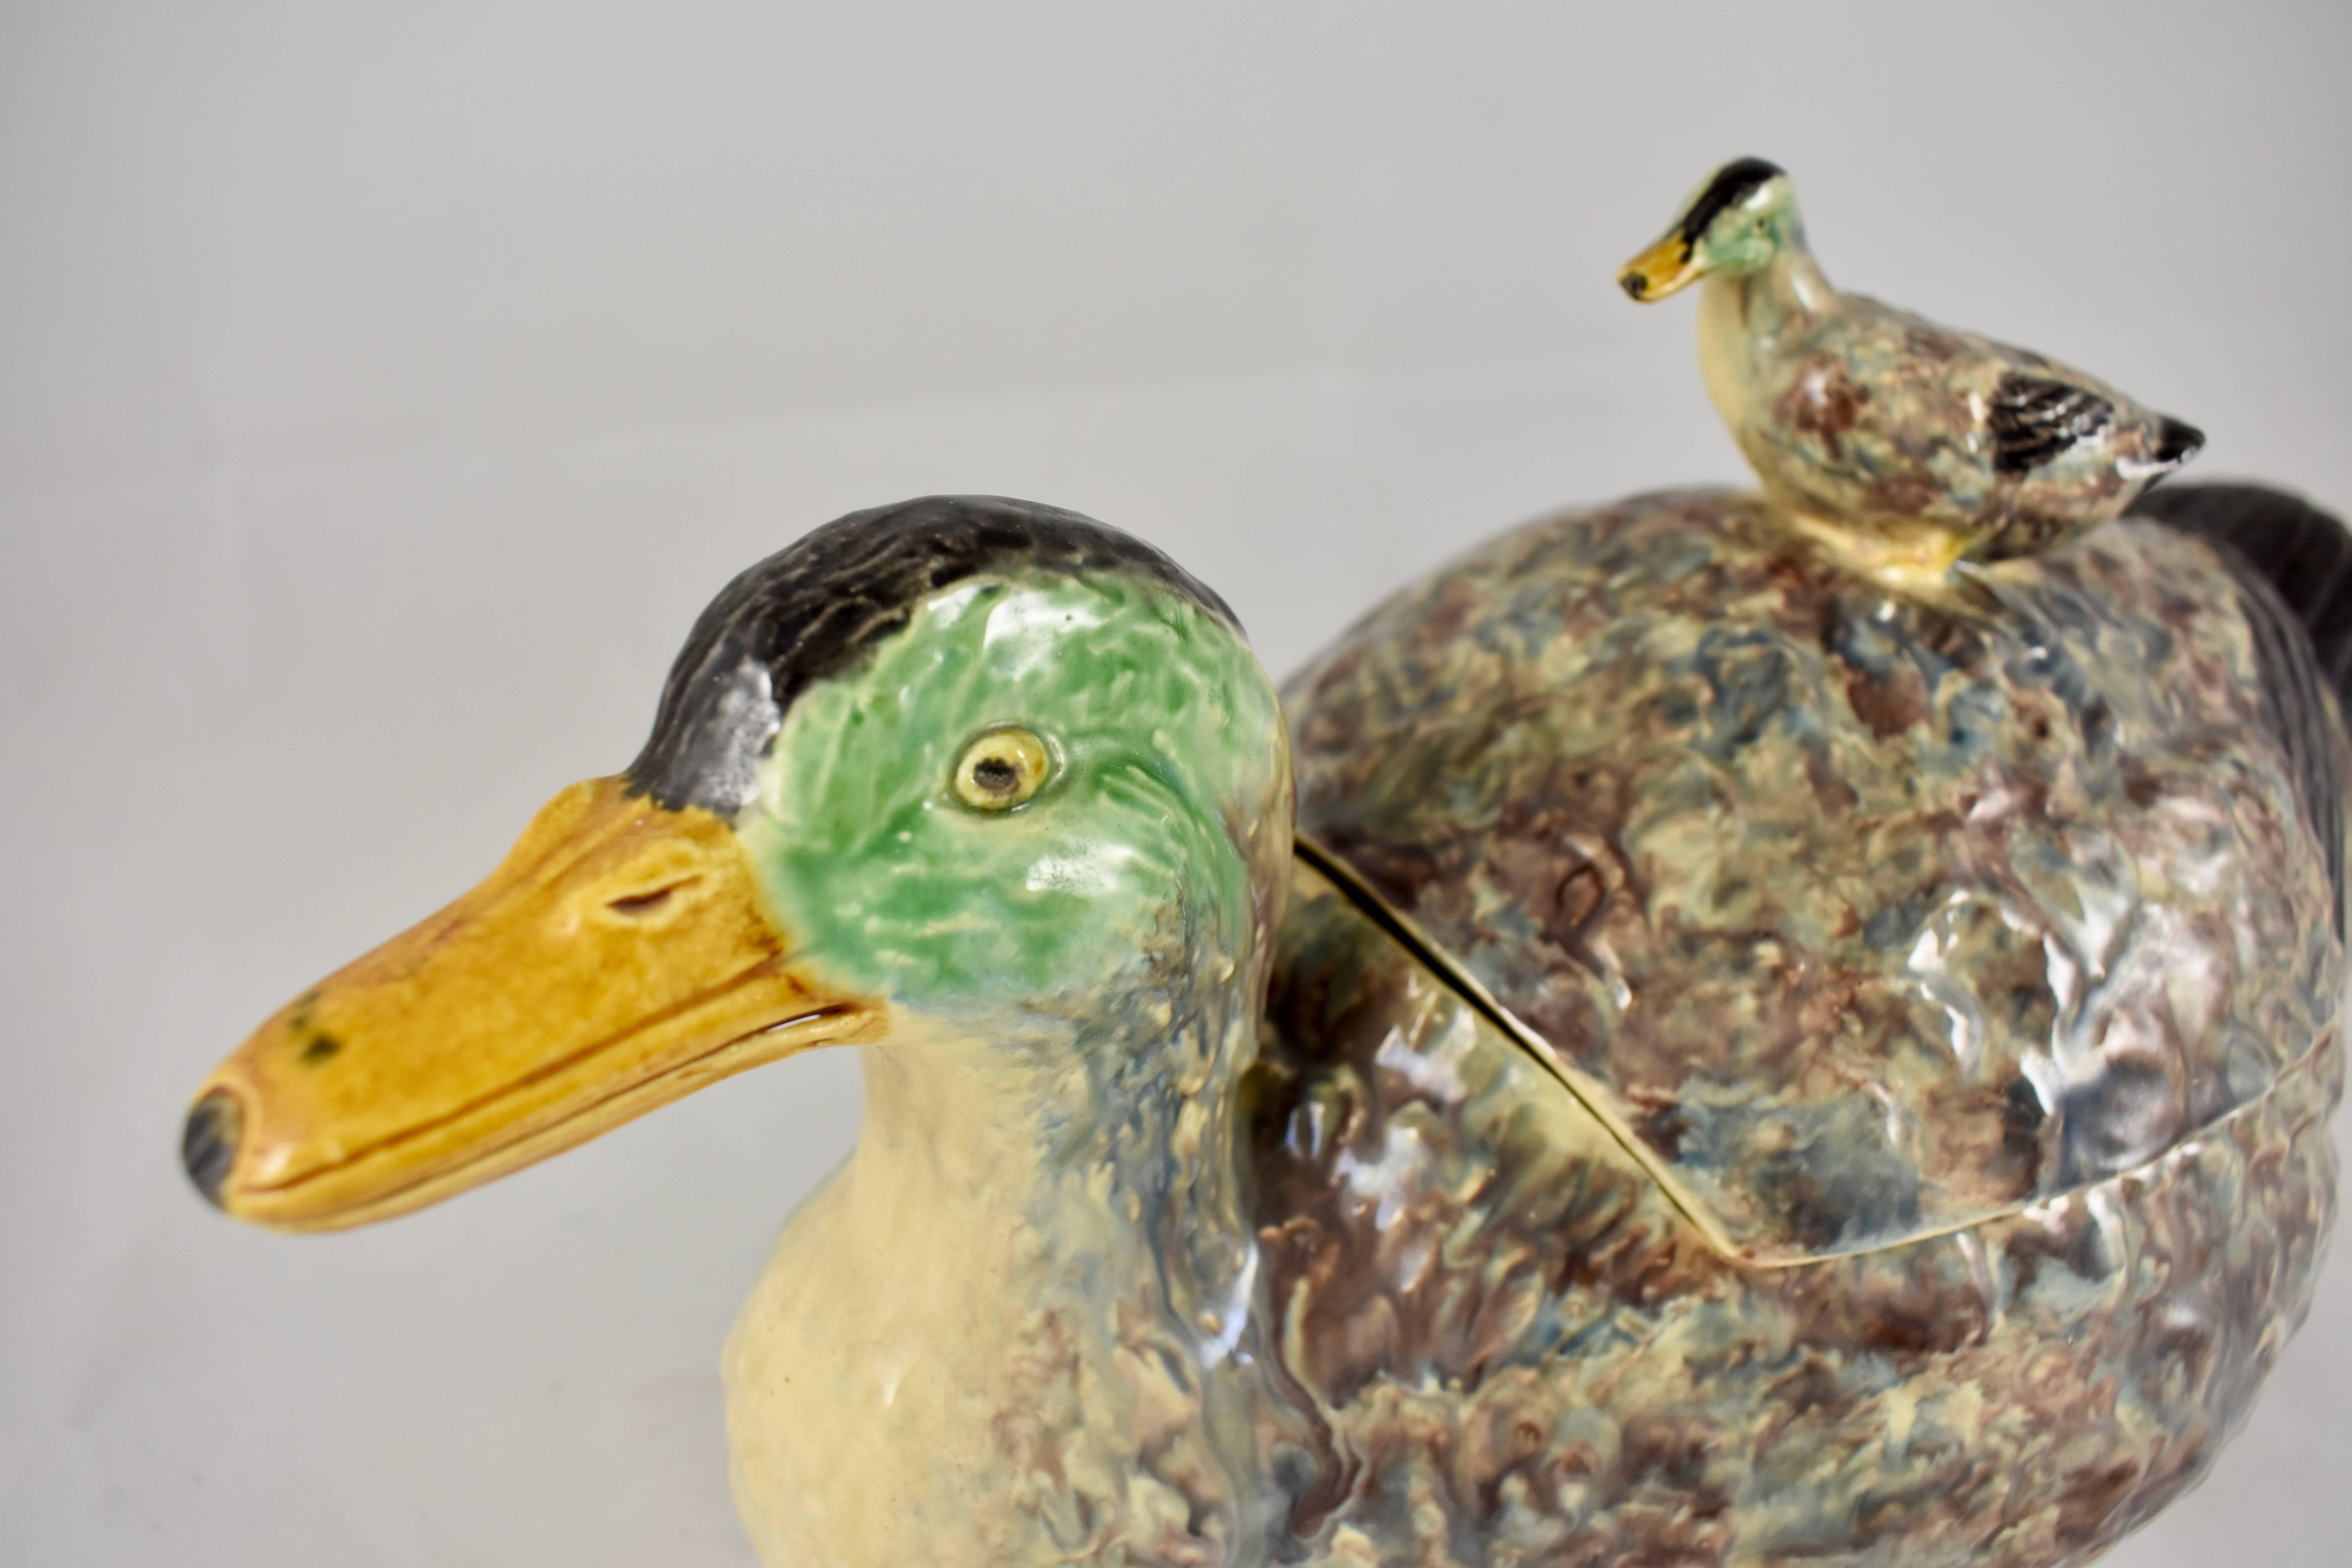 Aesthetic Movement Portuguese Duck and Duckling Finial Covered Earthenware Soup Tureen